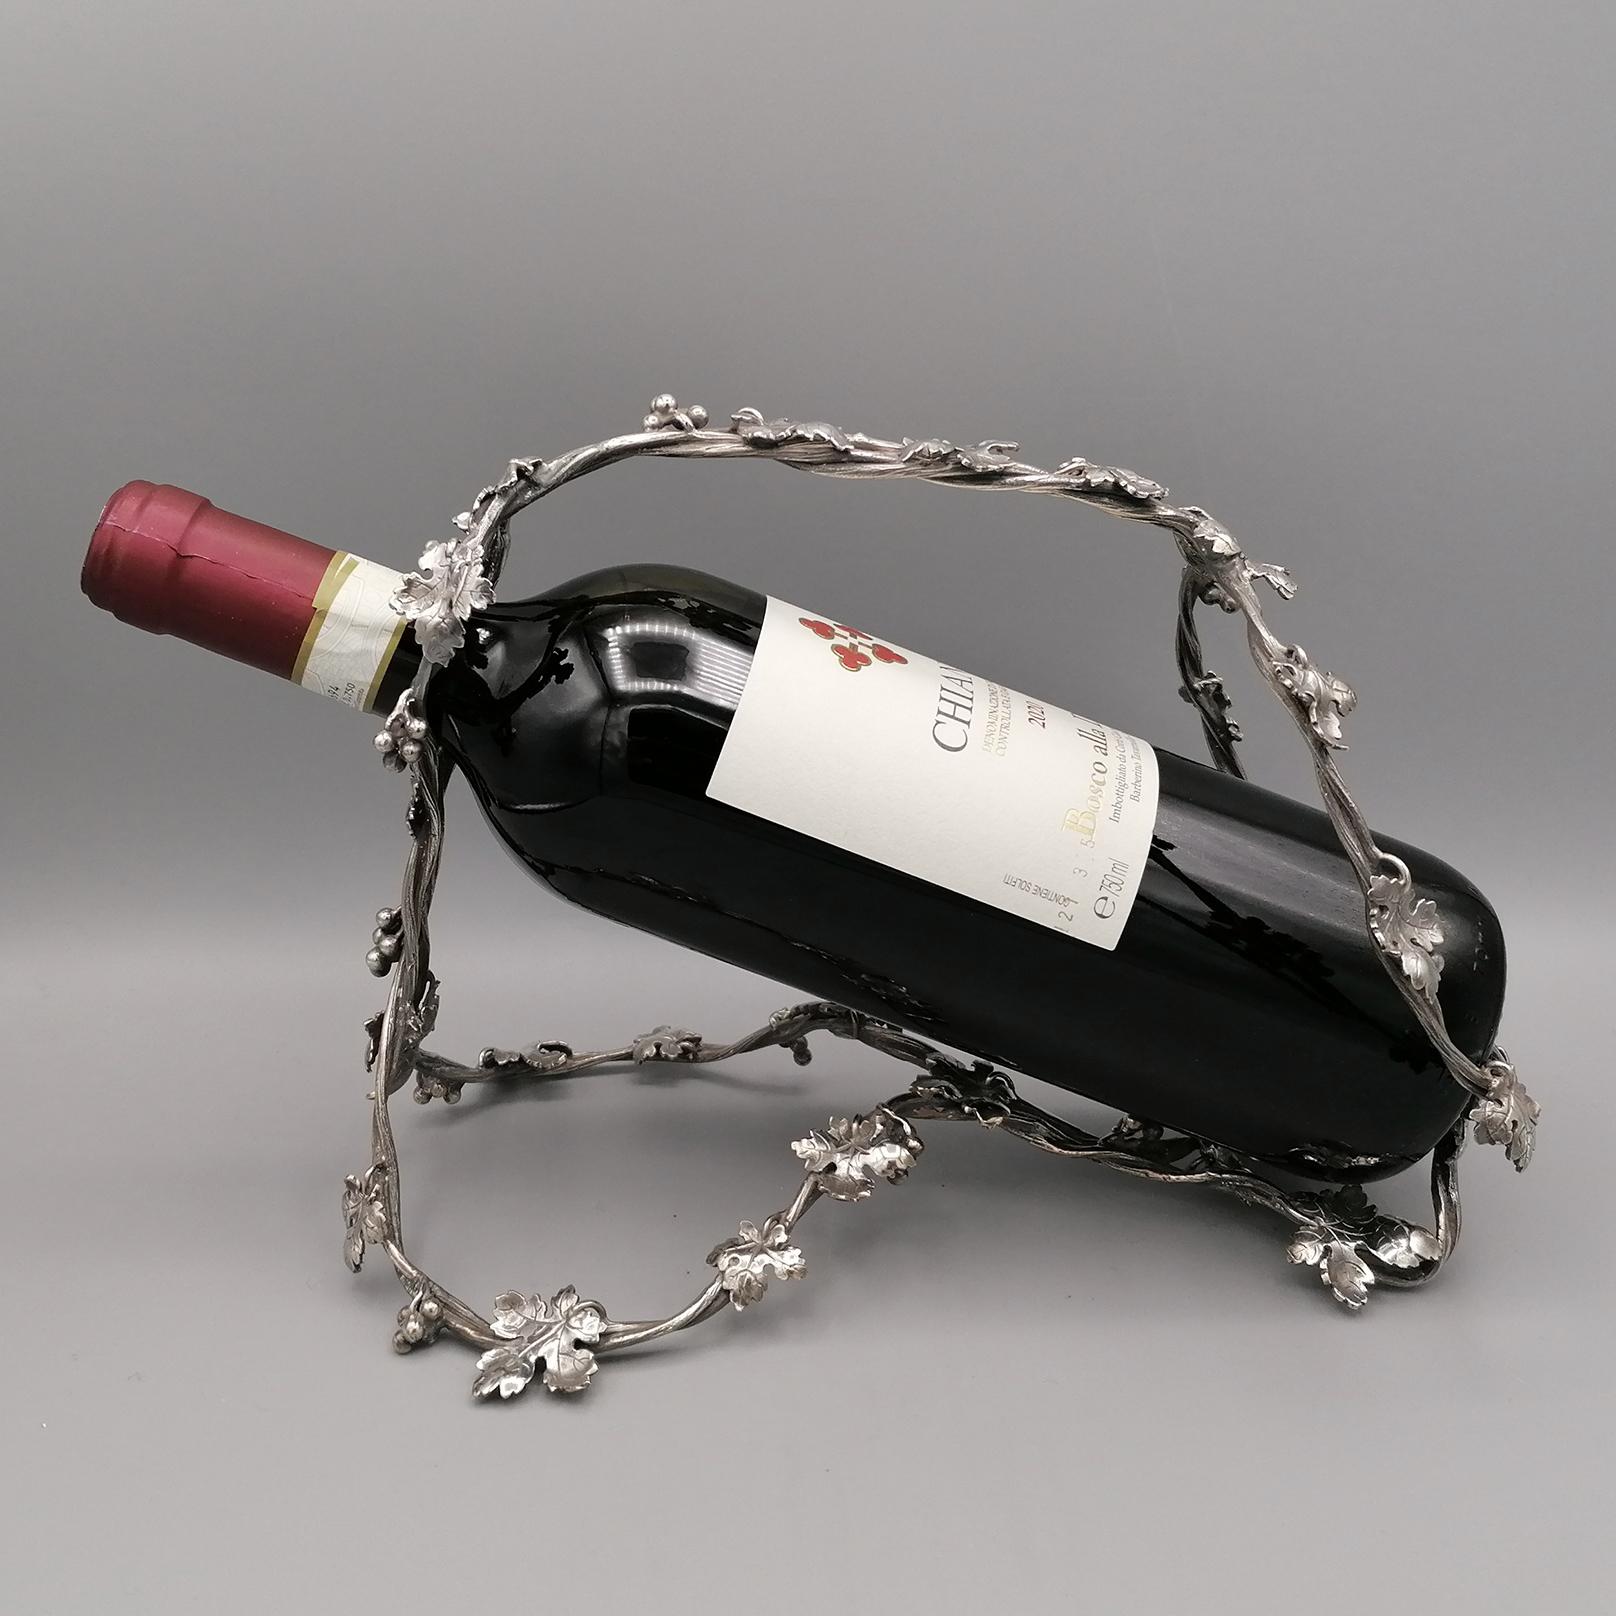 Italy, a country that produces great wines and an ancient agricultural tradition, could not fail to dedicate prestigious objects to pour red wine.
This bottle holder was made in sterling silver by the casting method and then finished with